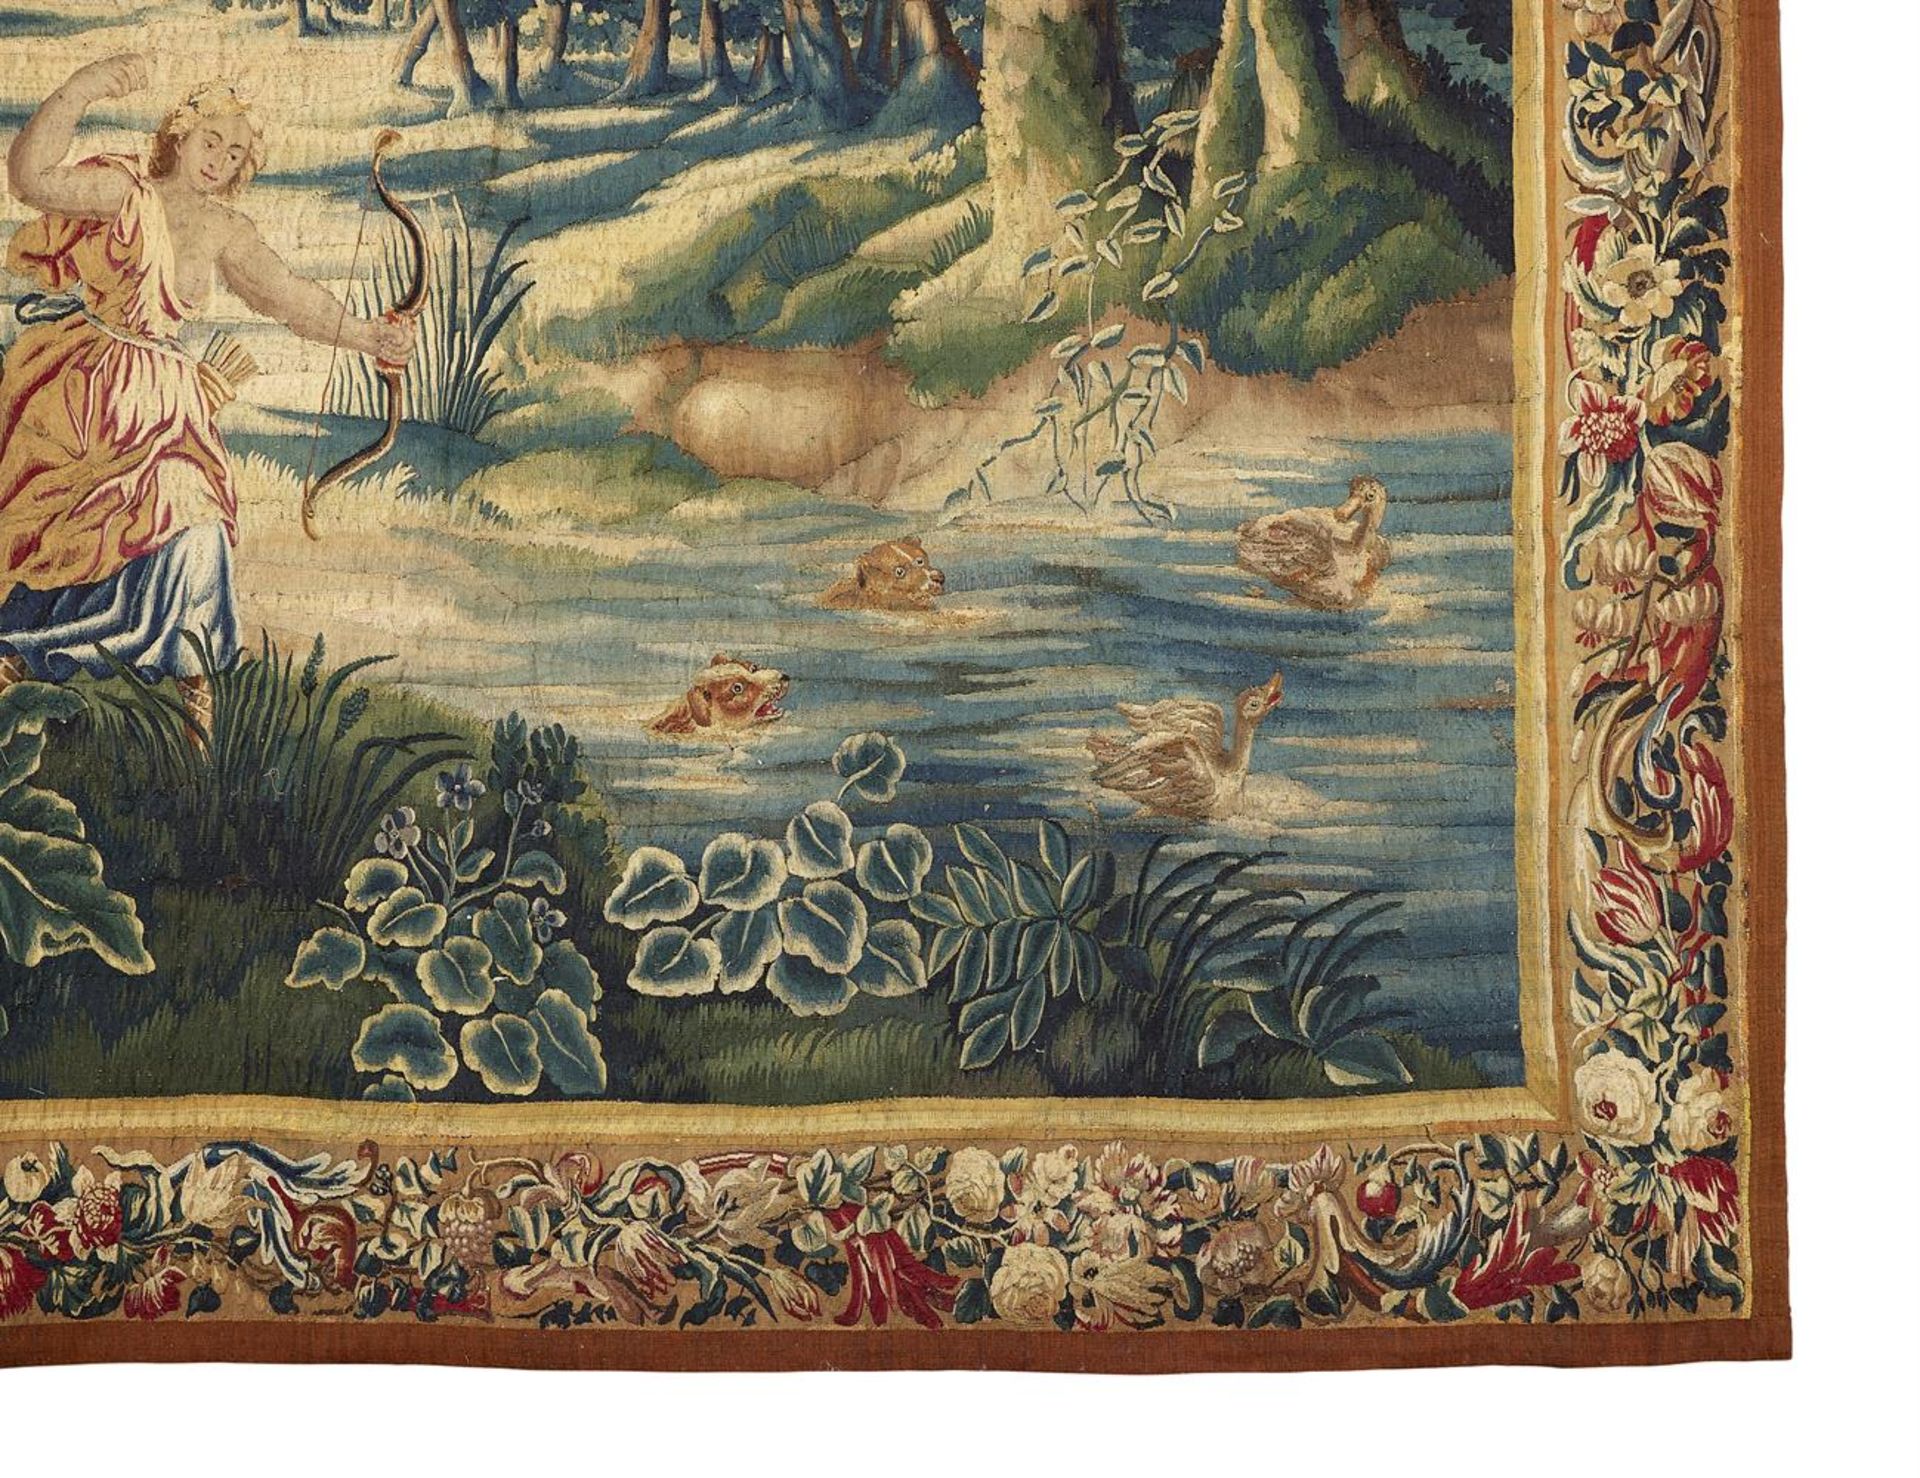 A FLEMISH MYTHOLOGICAL TAPESTRY OF DIANA THE HUNTRESS, LATE 17TH CENTURY/EARLY 18TH CENTURY - Bild 2 aus 3